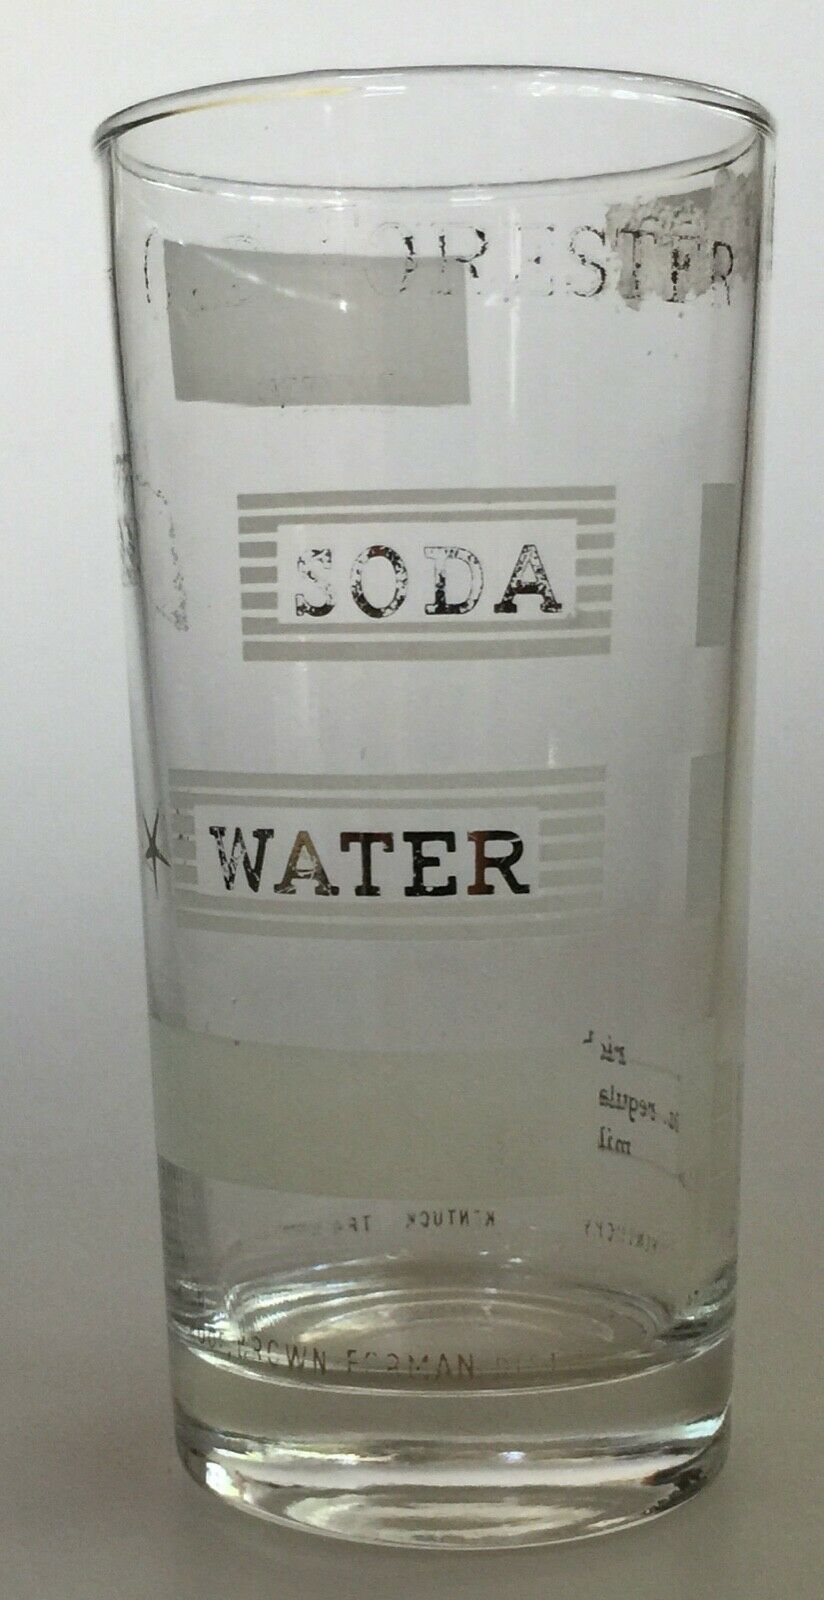 Soda Water Old Forester Whiskey Glass See Photo For Condition 5 3/4" X 2 3/4"!@!